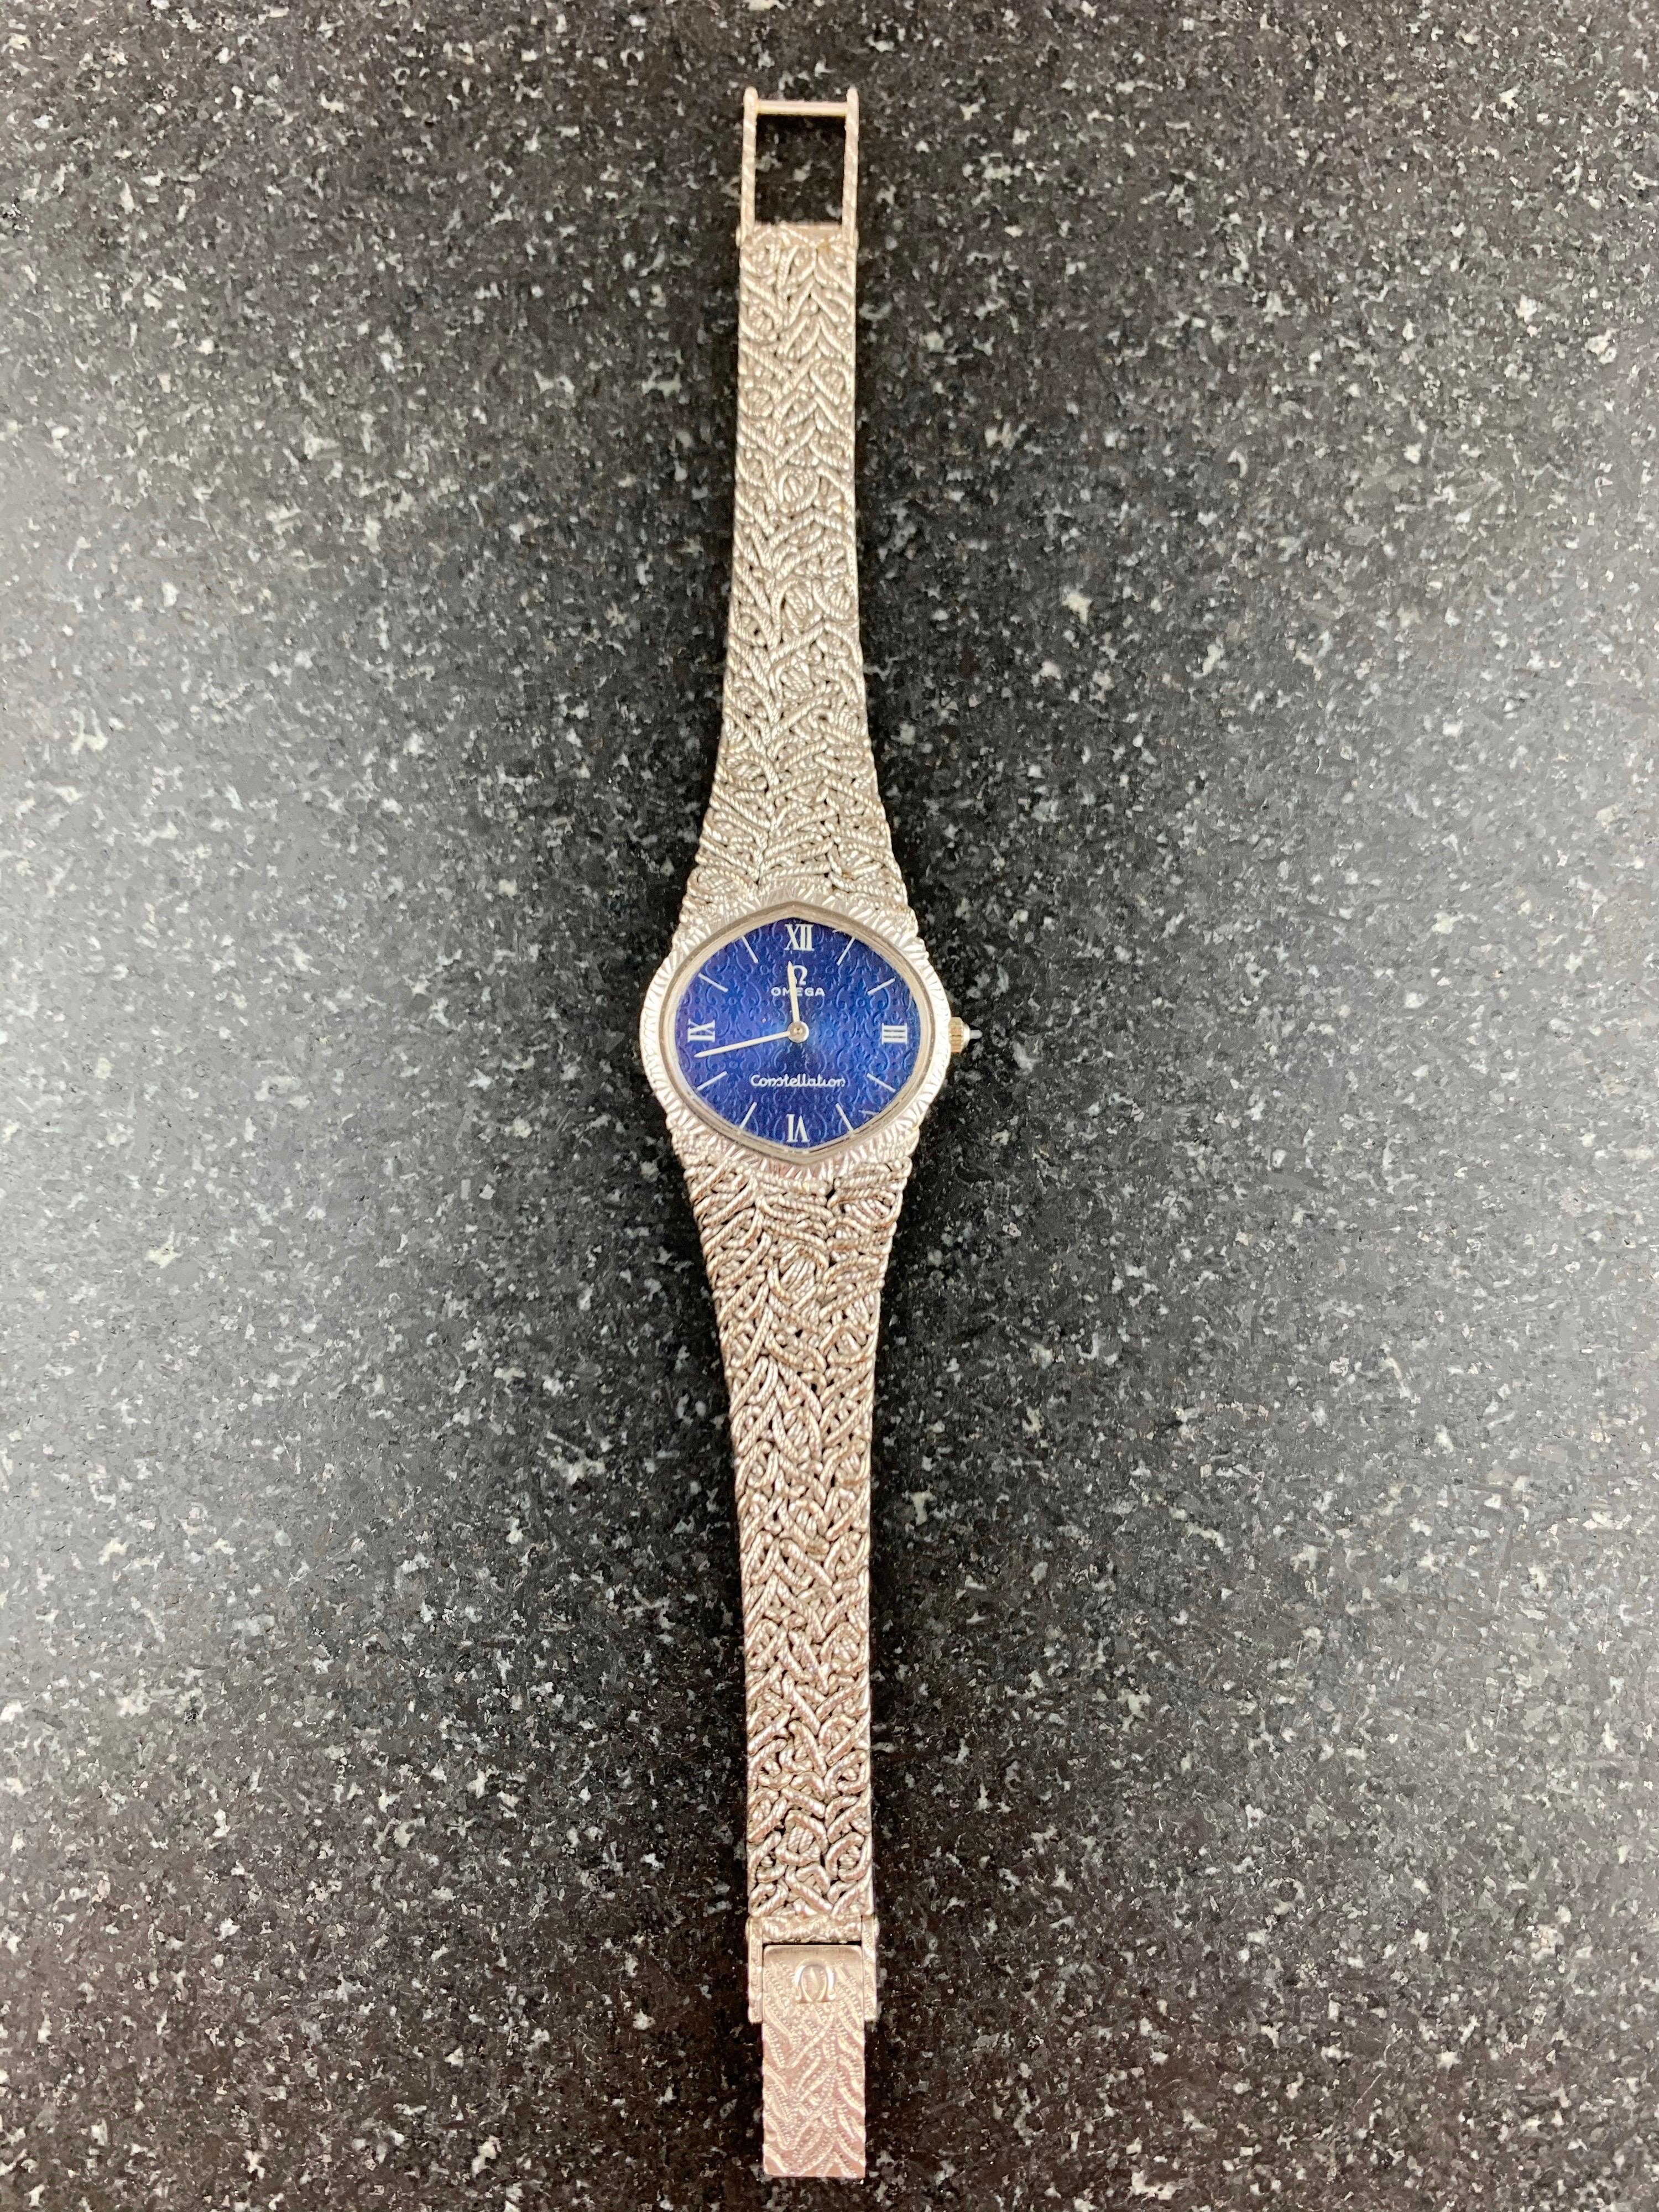 18K White Gold Omega Constellation Ladies Bracelet Dress Watch. 
The Watch Has A Lapis Blue Dial Lazuli Dial With Almond Shaped Bezel. 
18 Carat White Gold (52 Grams) Case With Integrated Entwined Woven White Gold Omega Bracelet. The Detailed Crown